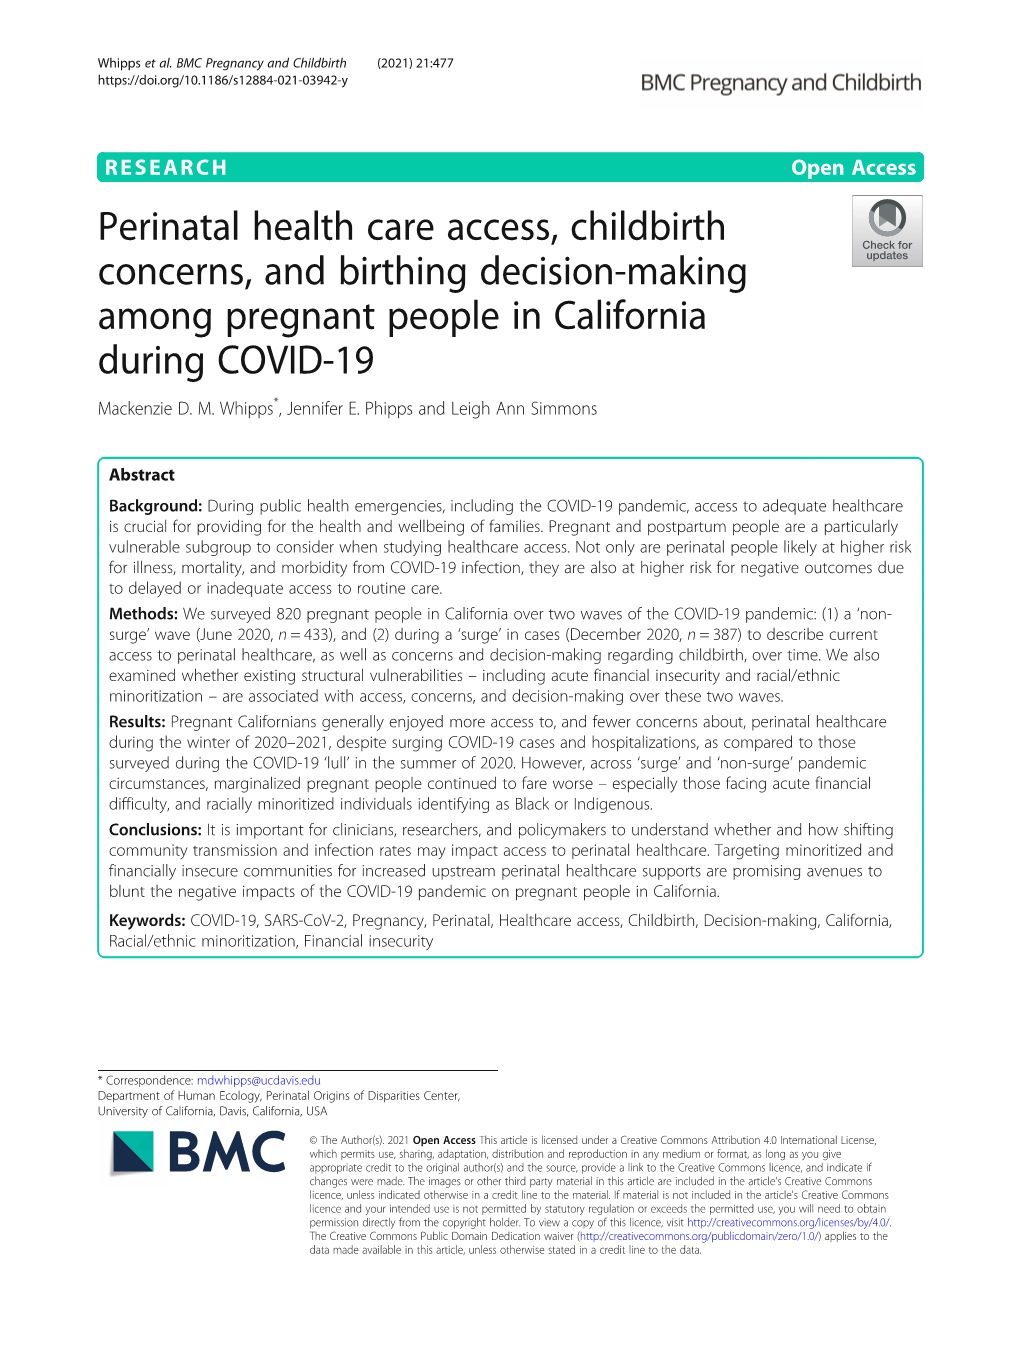 Perinatal Health Care Access, Childbirth Concerns, and Birthing Decision-Making Among Pregnant People in California During COVID-19 Mackenzie D